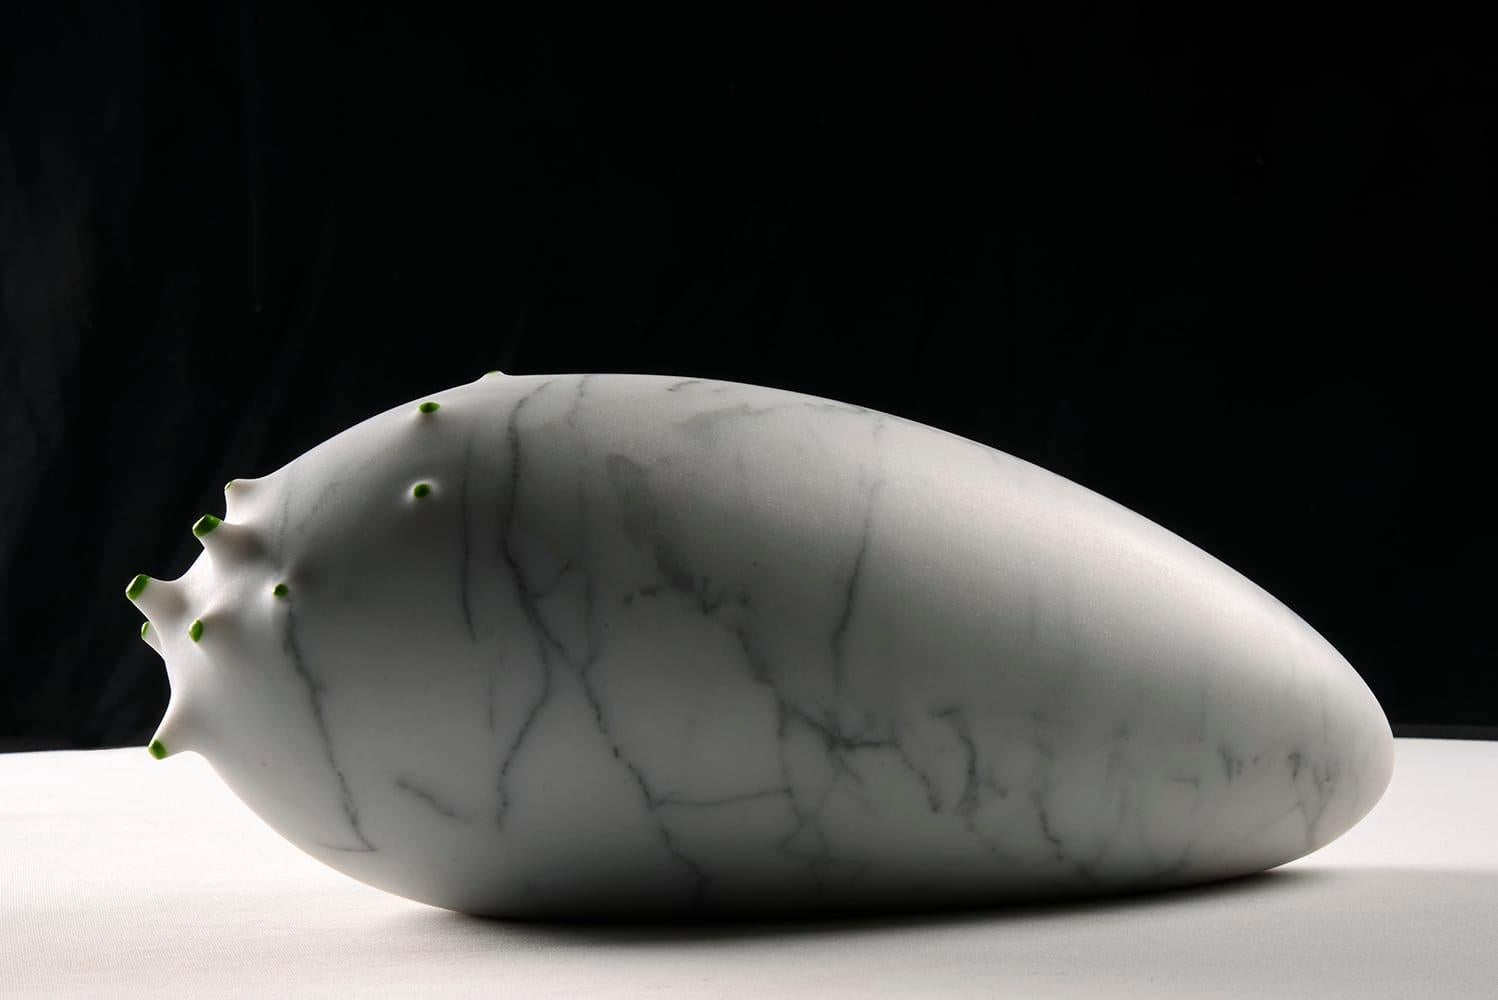 Seed is a unique white Carrara marble and glaze sculpture by contemporary artist Francesca Bernardini. The dimensions are 20 × 38 × 20 cm (7.9 × 15 × 7.9 in). 
The sculpture is signed and comes with a certificate of authenticity.

The smooth,